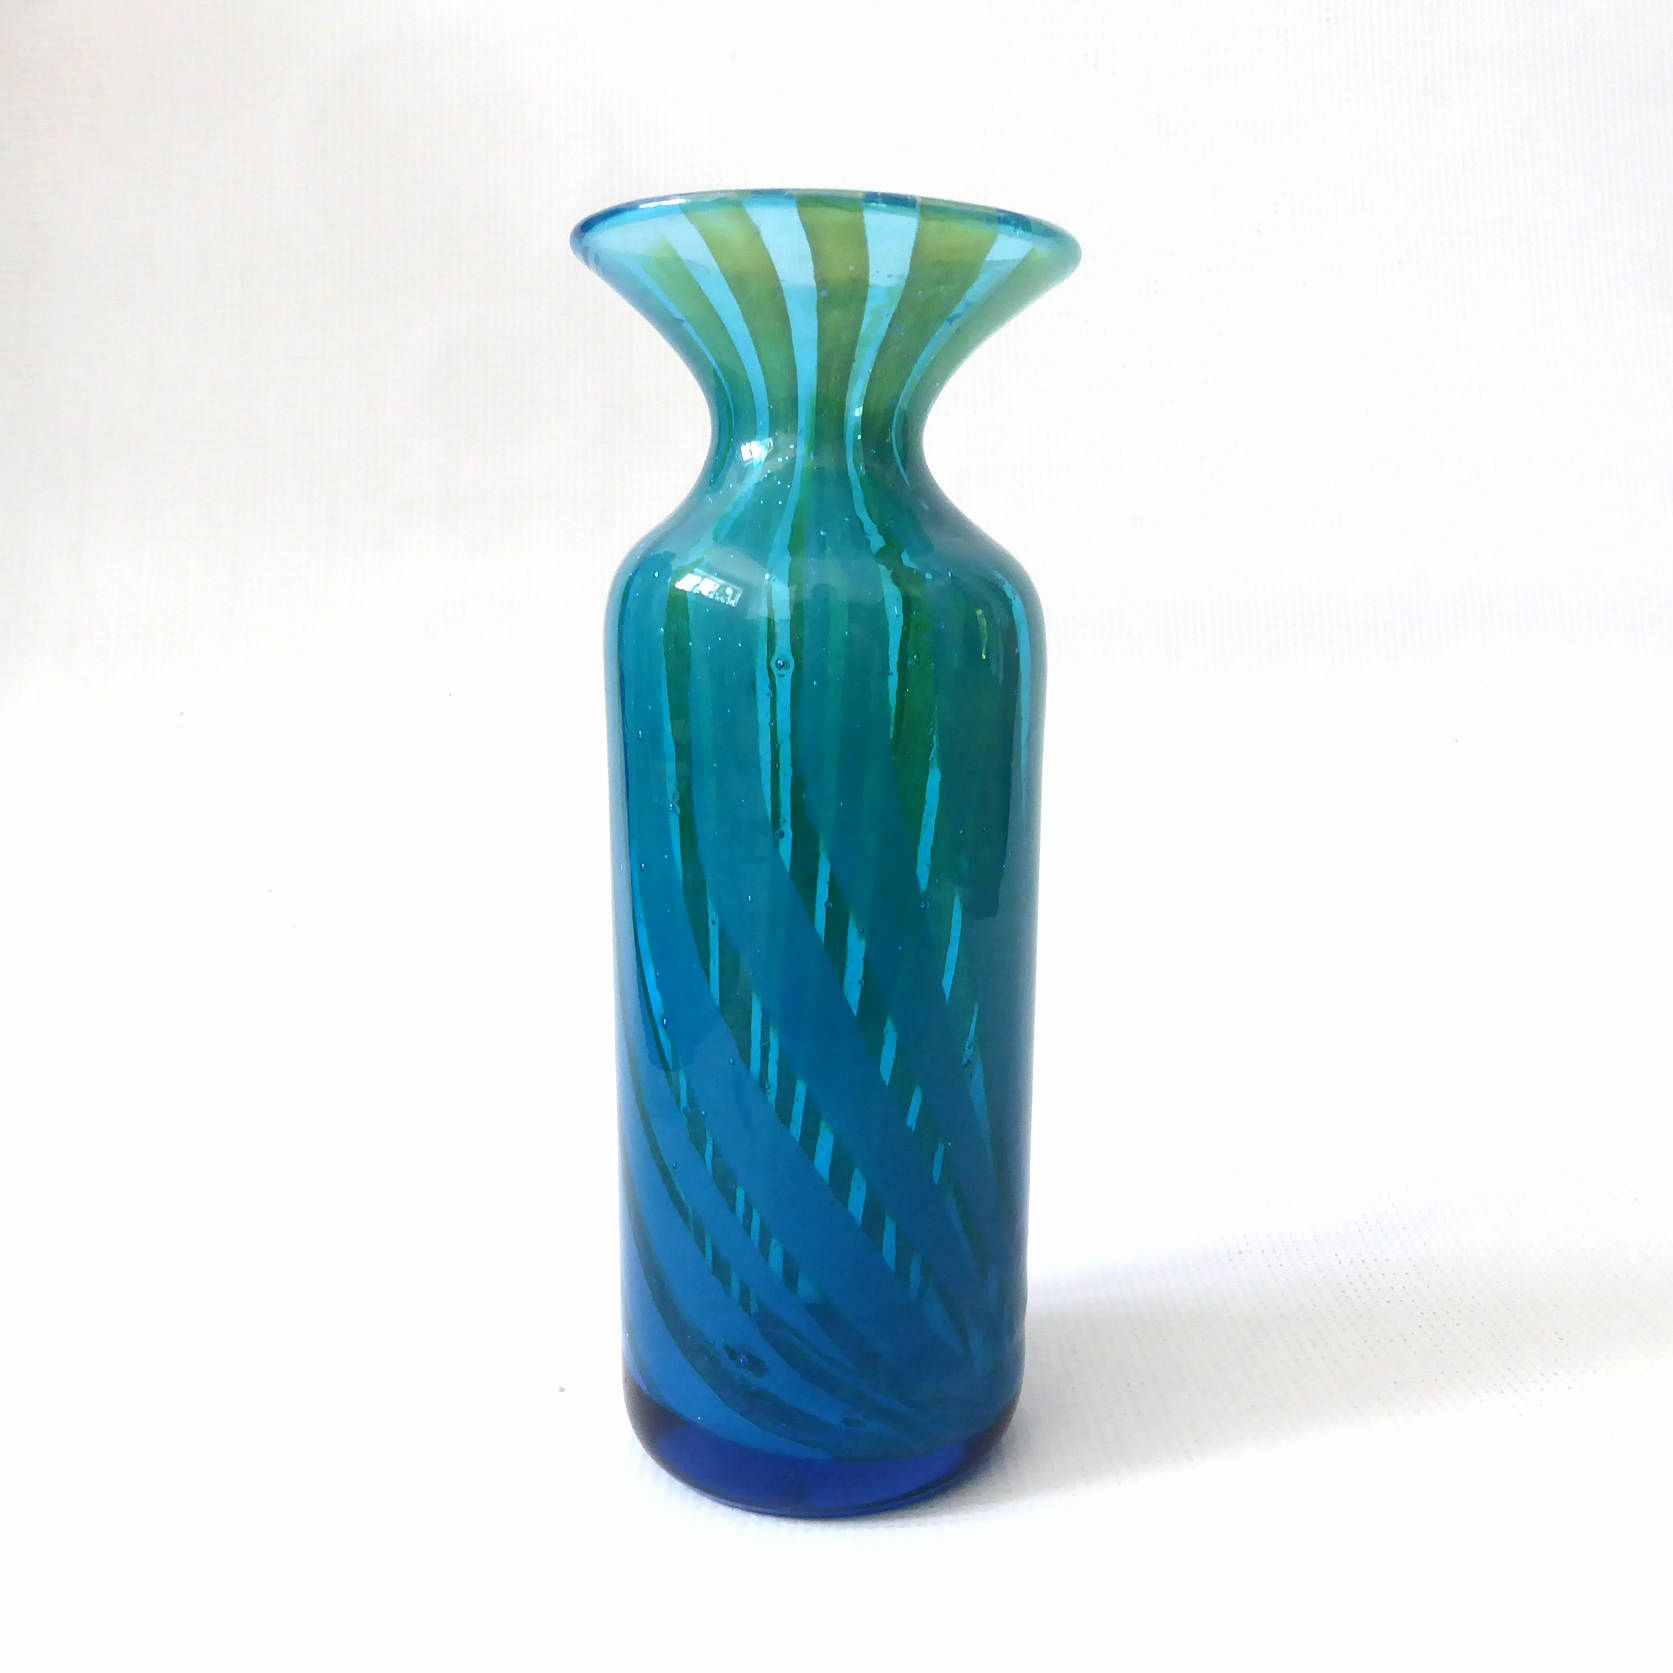 16 Famous Green Glass Bottle Vase 2022 free download green glass bottle vase of 35 antique green glass vases the weekly world intended for antique glass vases identify vase and cellar image avorcor